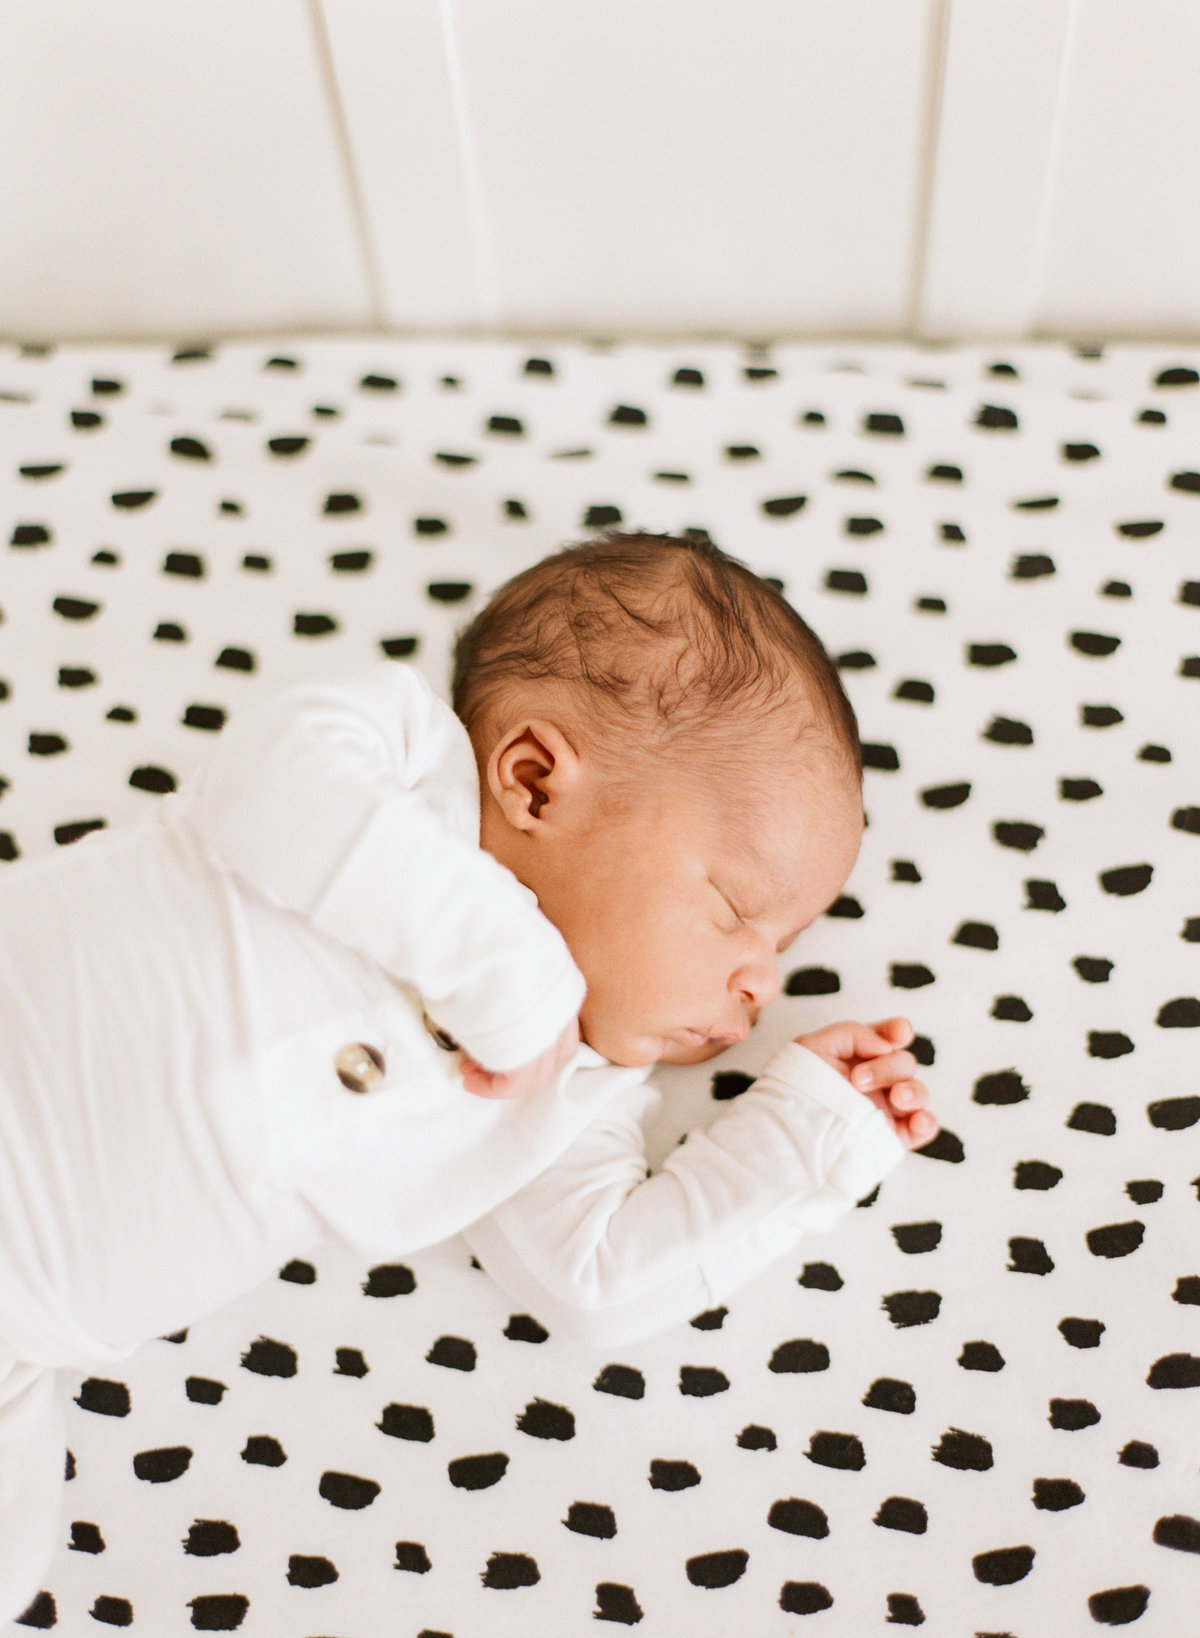 Baby lays on a black and white polka dot crip sheet while sleeping during a Raleigh NC newborn photography session. Photographed by newborn photographers Raleigh A.J. Dunlap Photography.